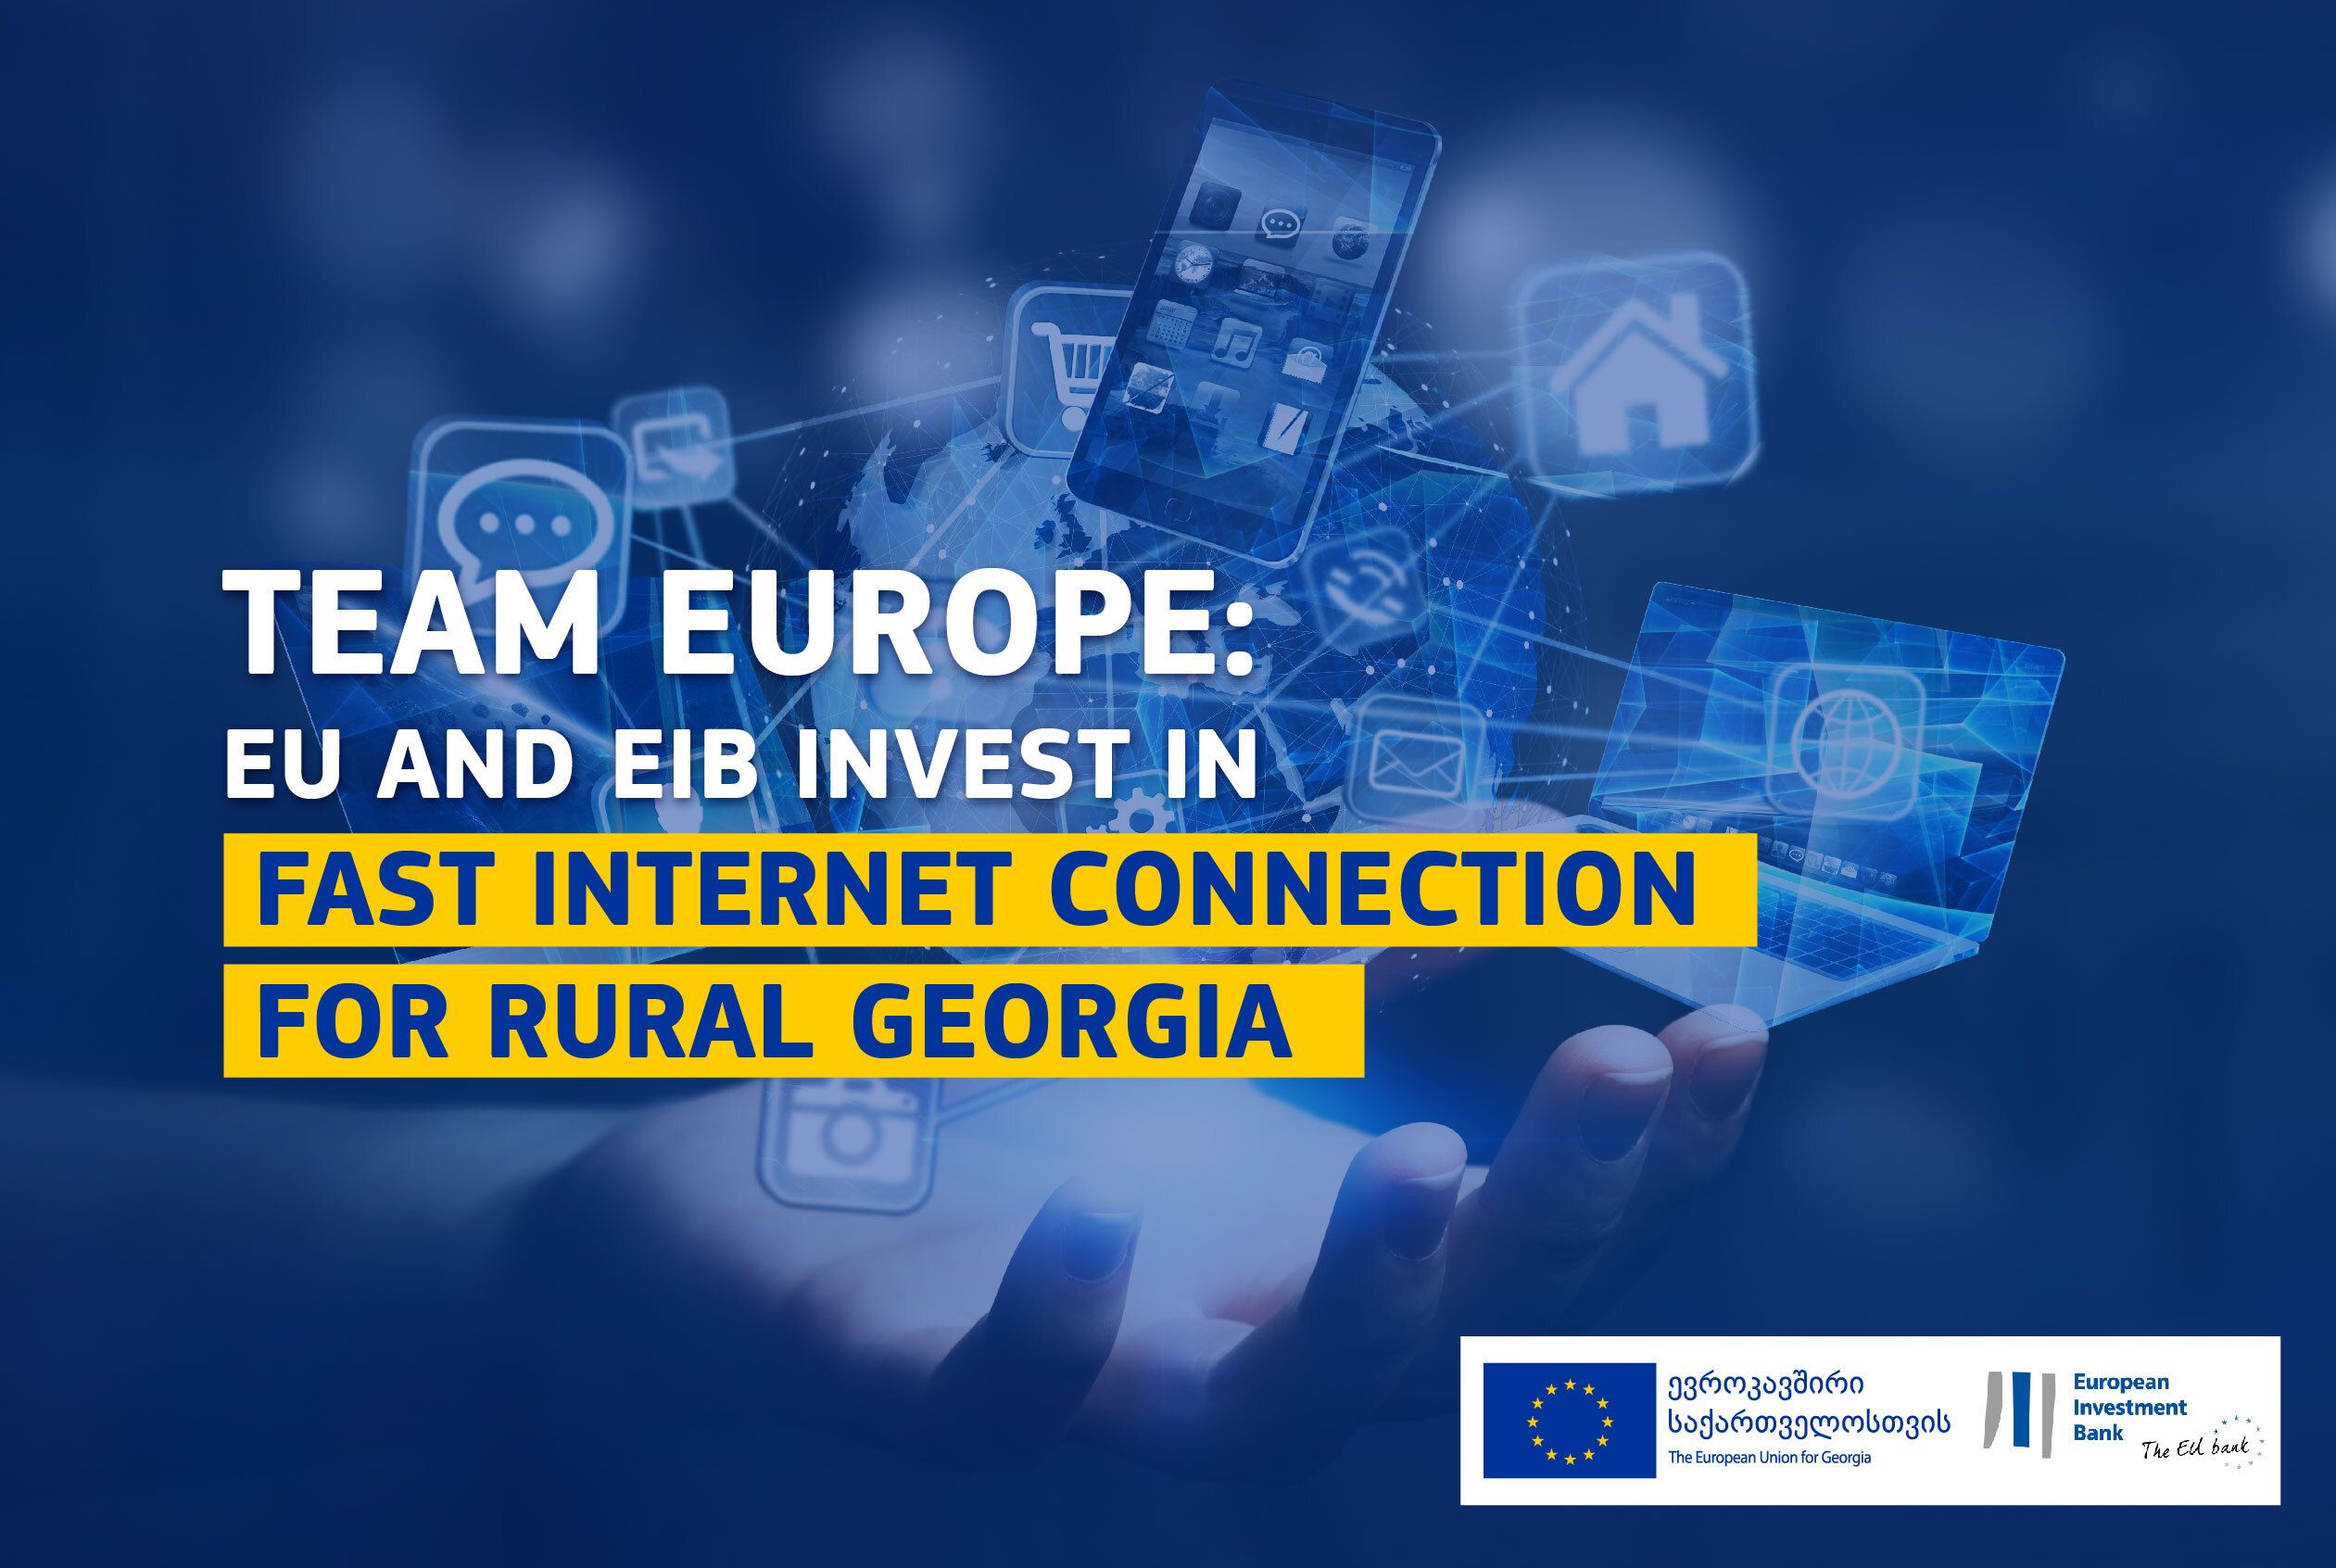 Team Europe: EU and EIB invest in fast internet connection for rural Georgia